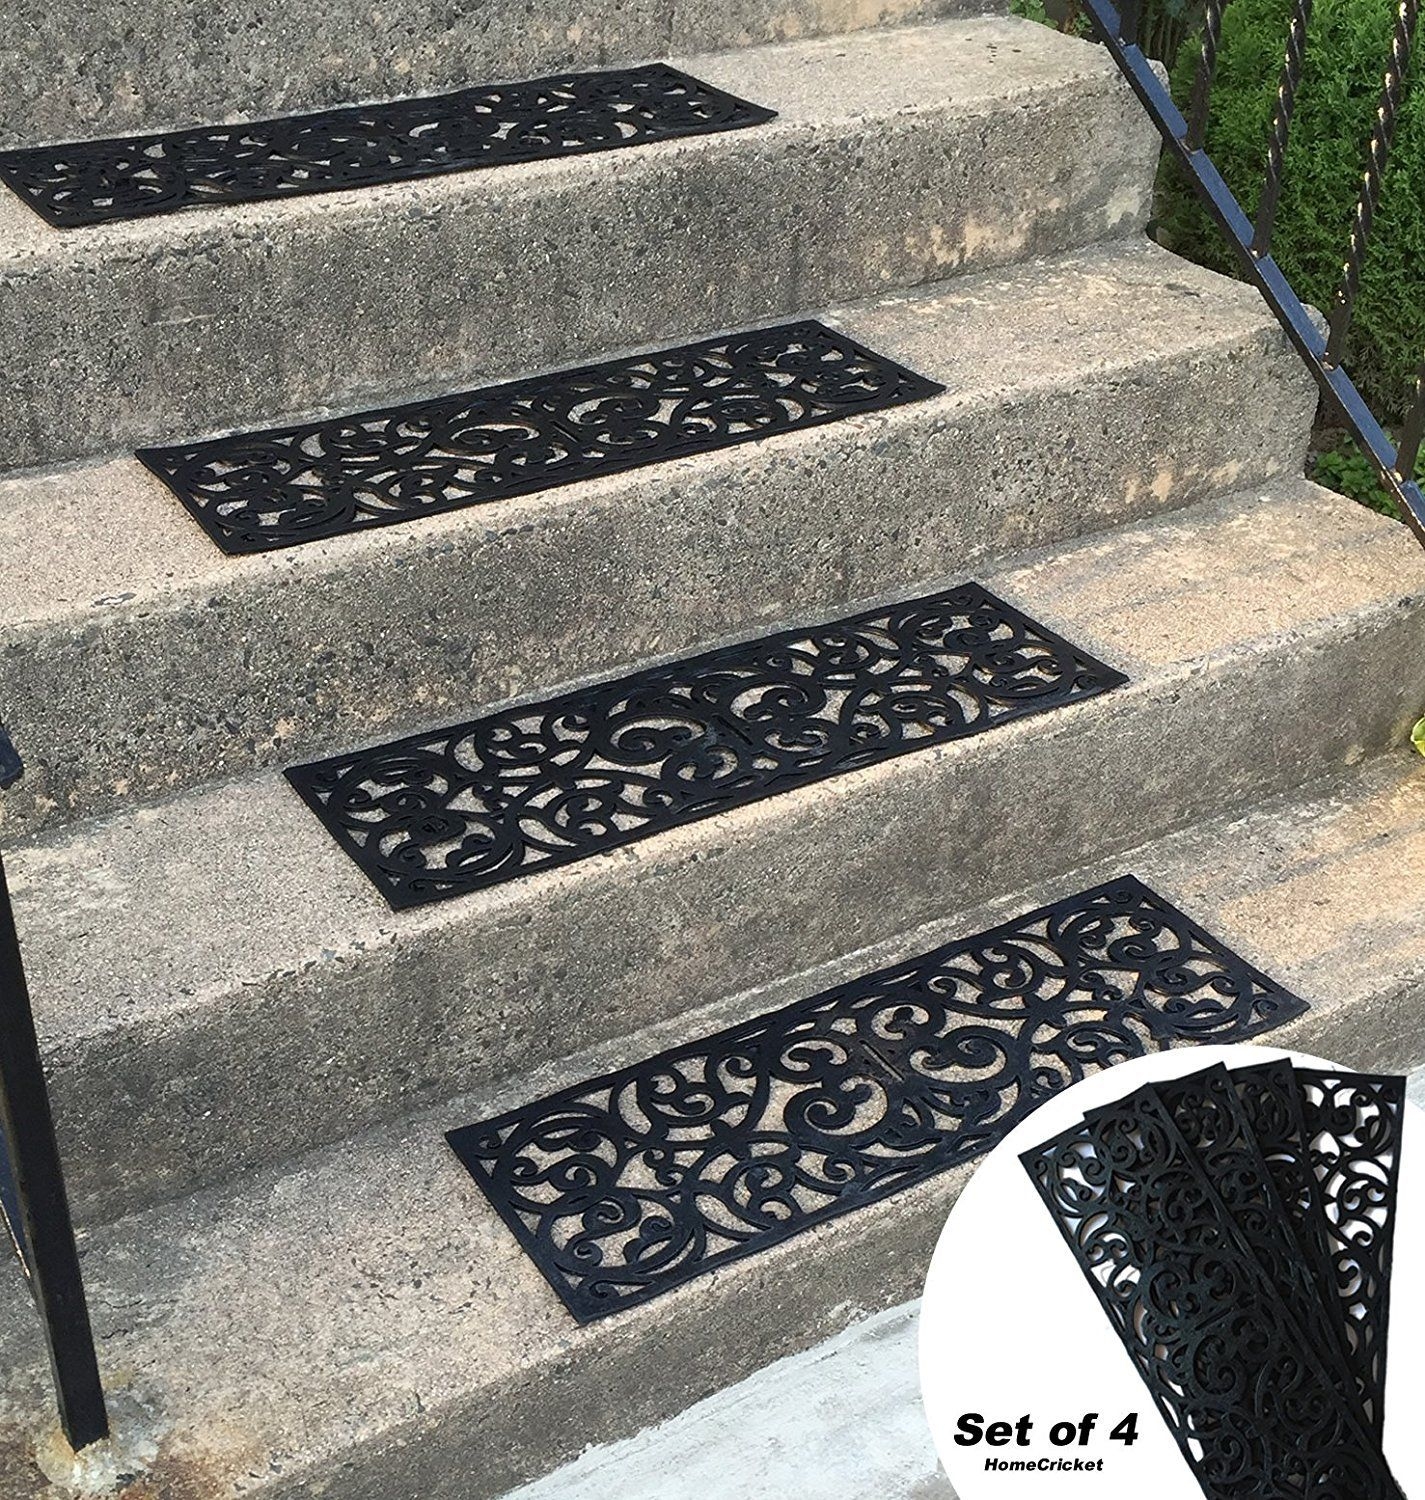 5 Black Rubber Treads per Box with Screws and Washers Included Heavy Duty Anti Skid Strips for Outside Use 4x24-inch Textured Non-Slip Mats for Staircase Outdoor Rubber Stair Treads